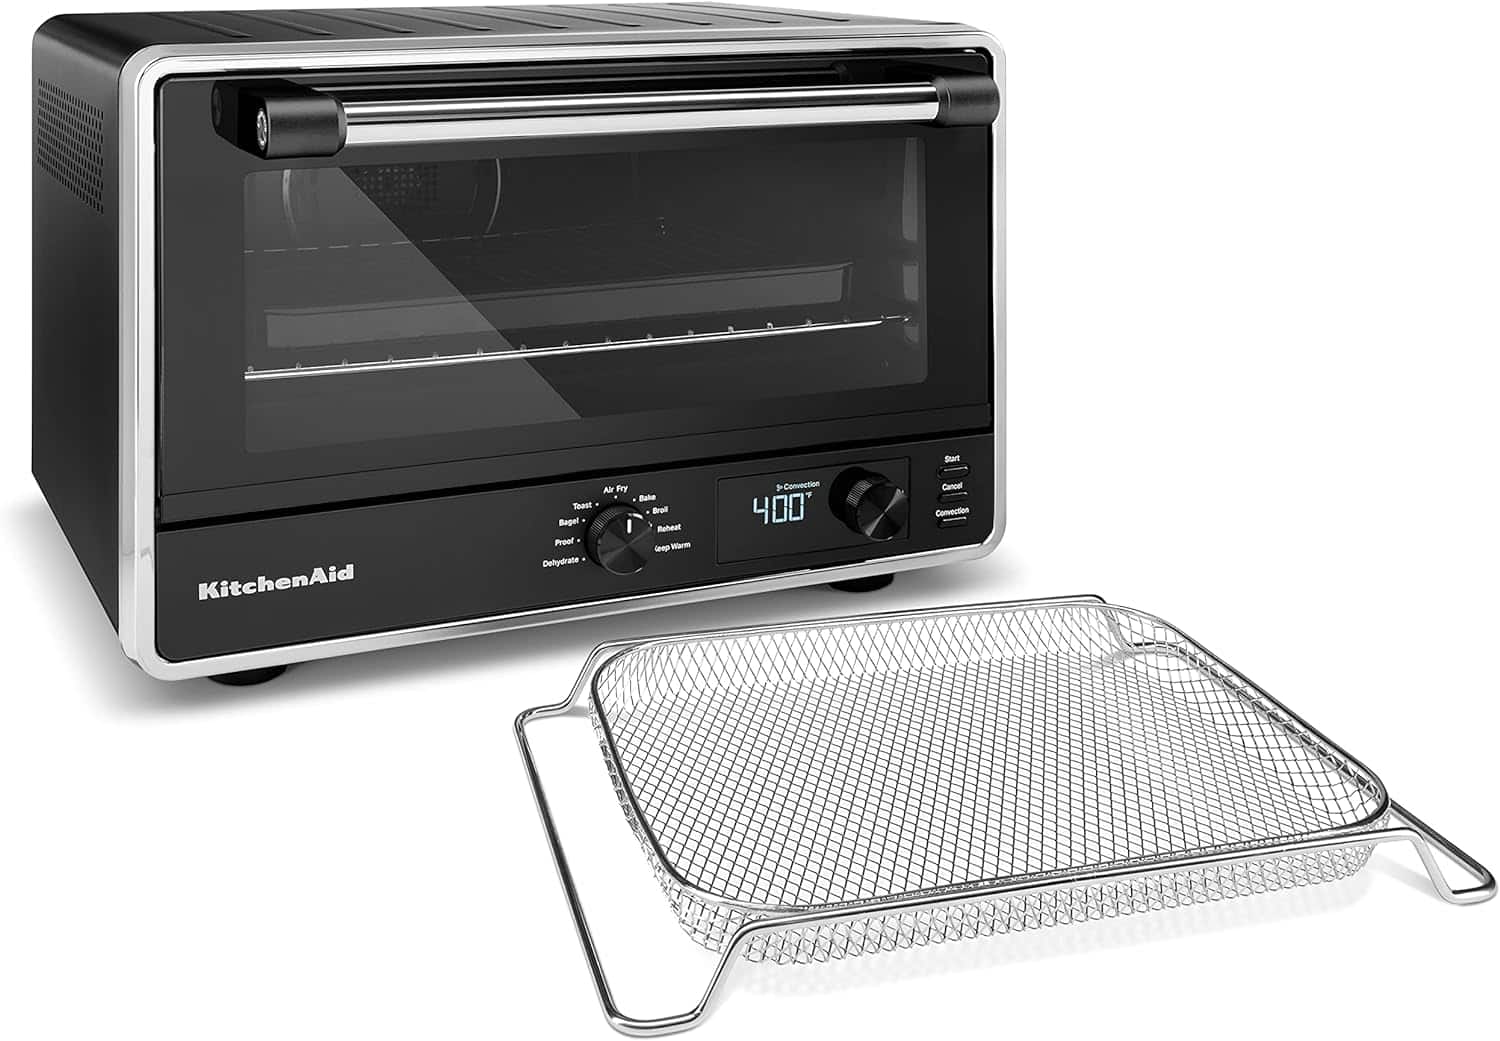 KitchenAid Digital Countertop Oven with Air Fry - A Versatile Kitchen Appliance Review